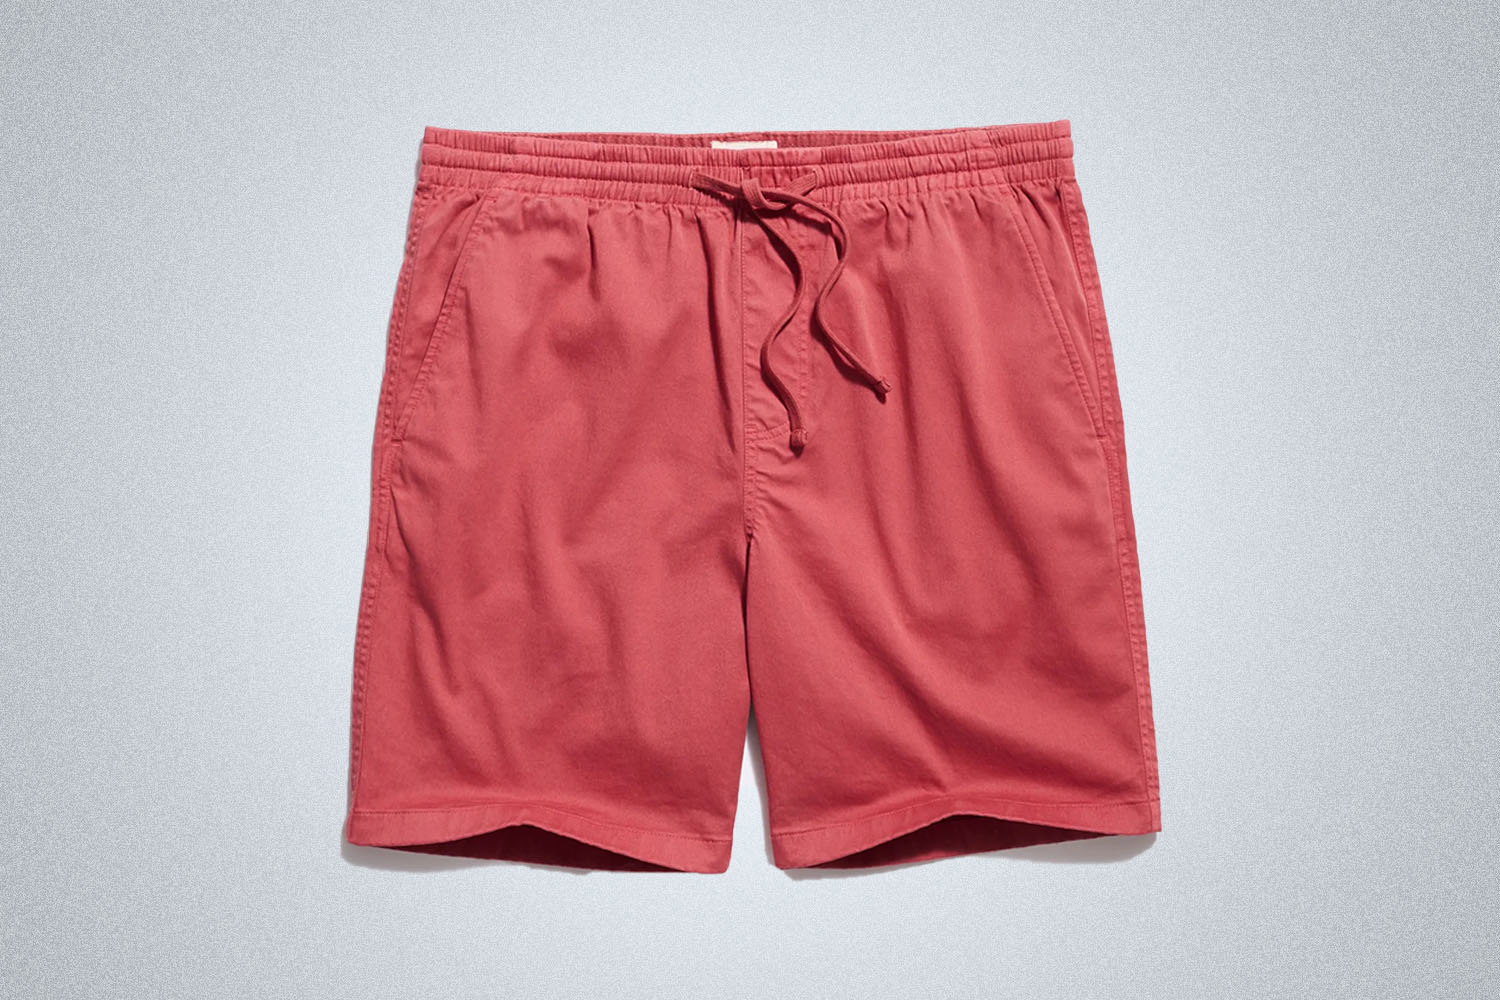 a pair of red shorts from Todd Snyder on a grey background